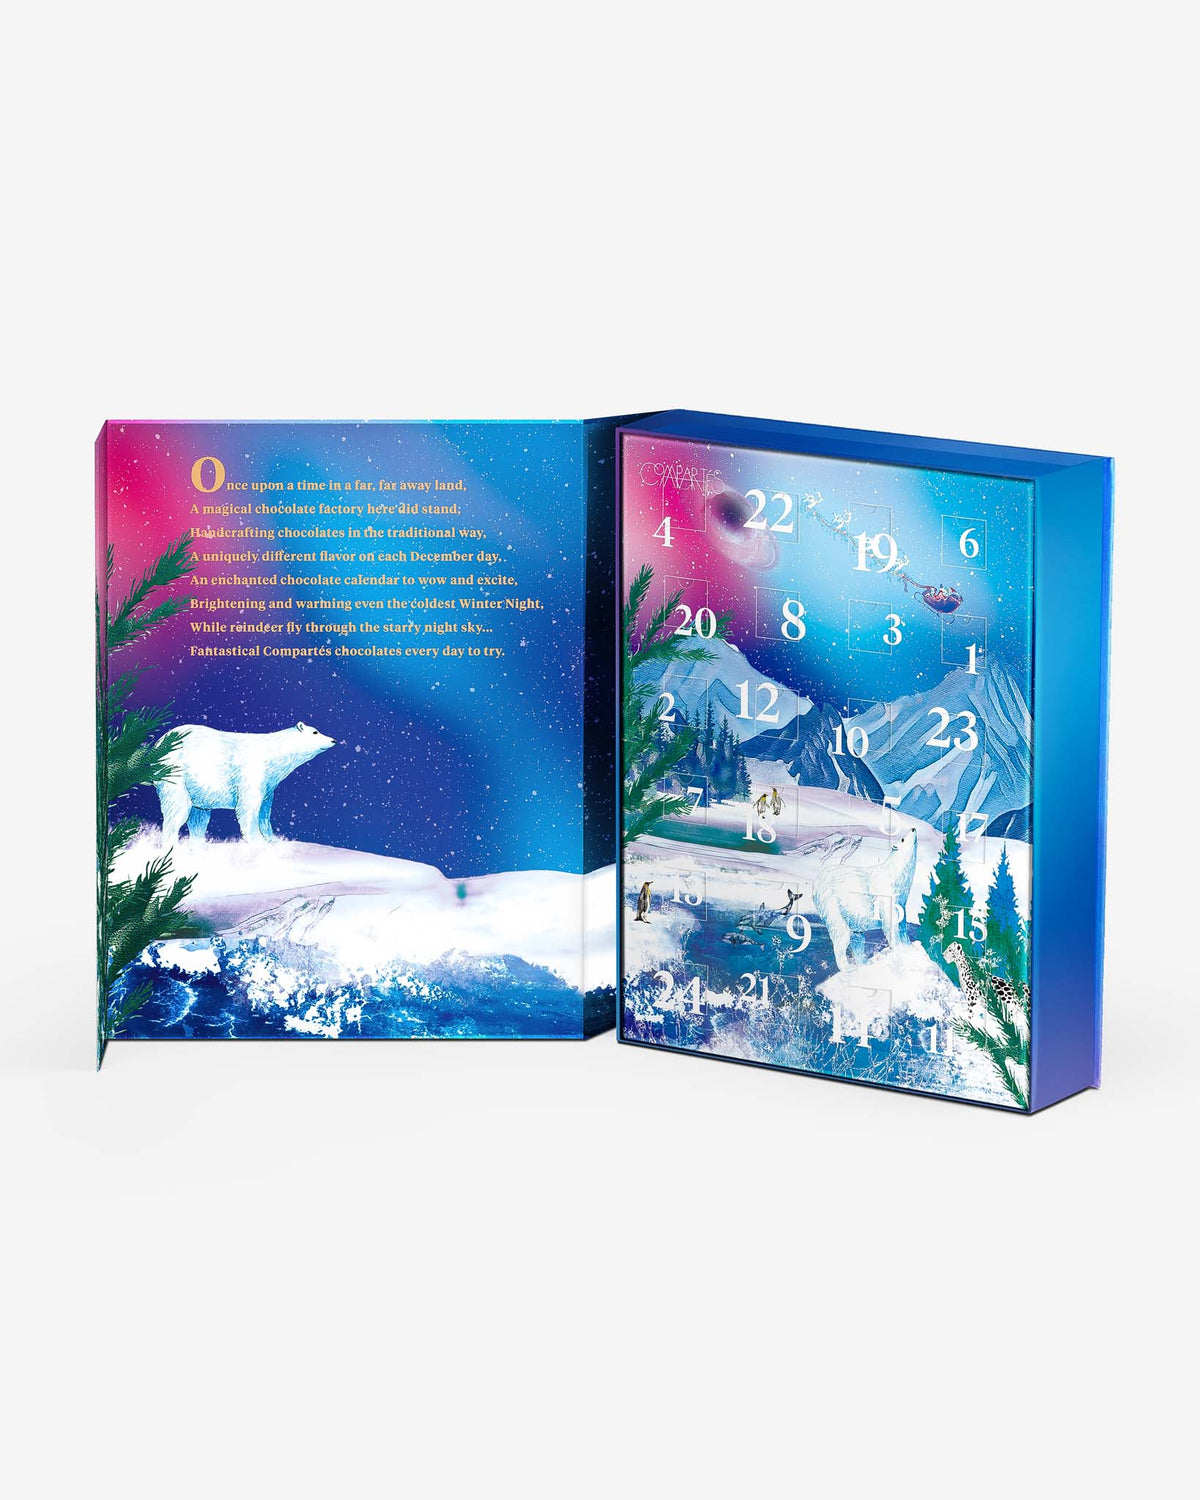 Gourmet Chocolate Advent Calendar - Luxury Chocolate Gifts by Compartes Los Angeles